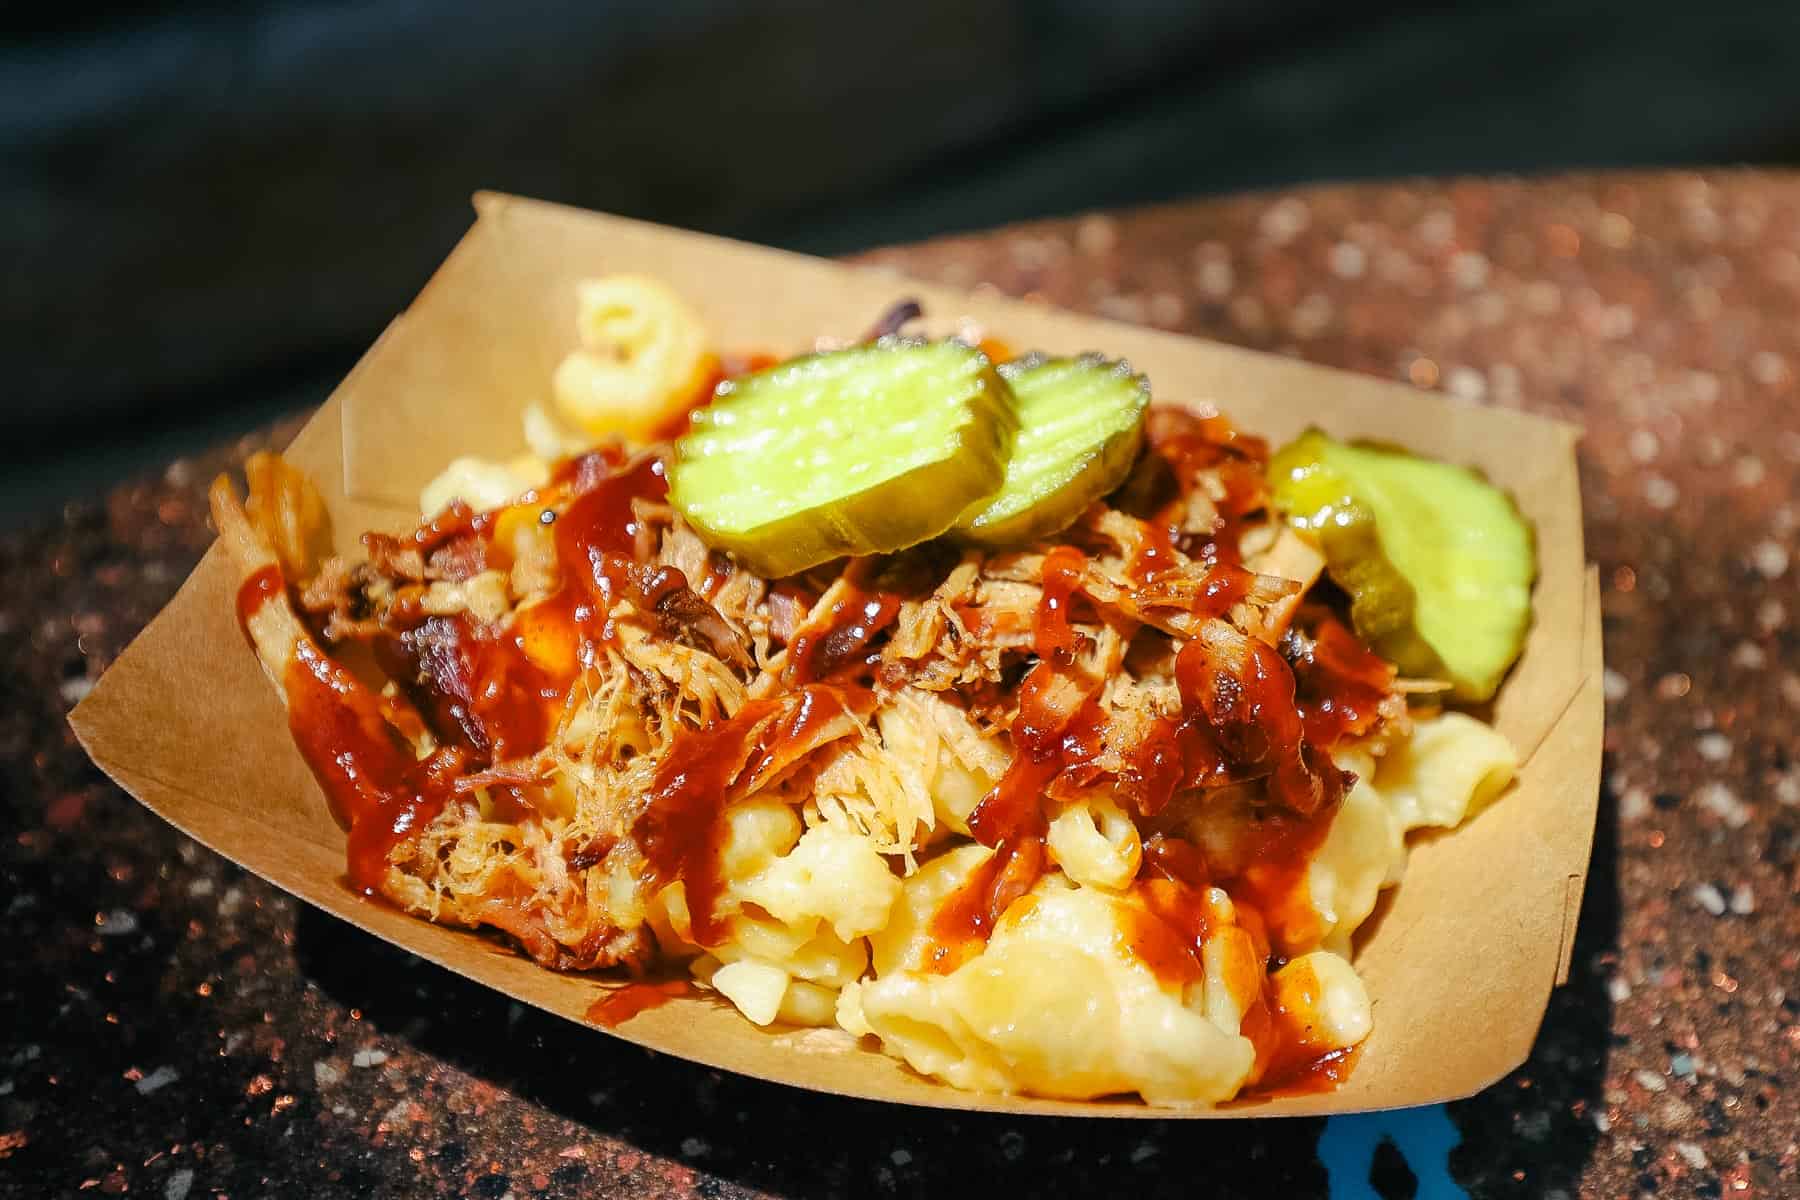 a snack with macaroni and cheese topped with barbecue and pickles from Disney's Animal Kingdom 